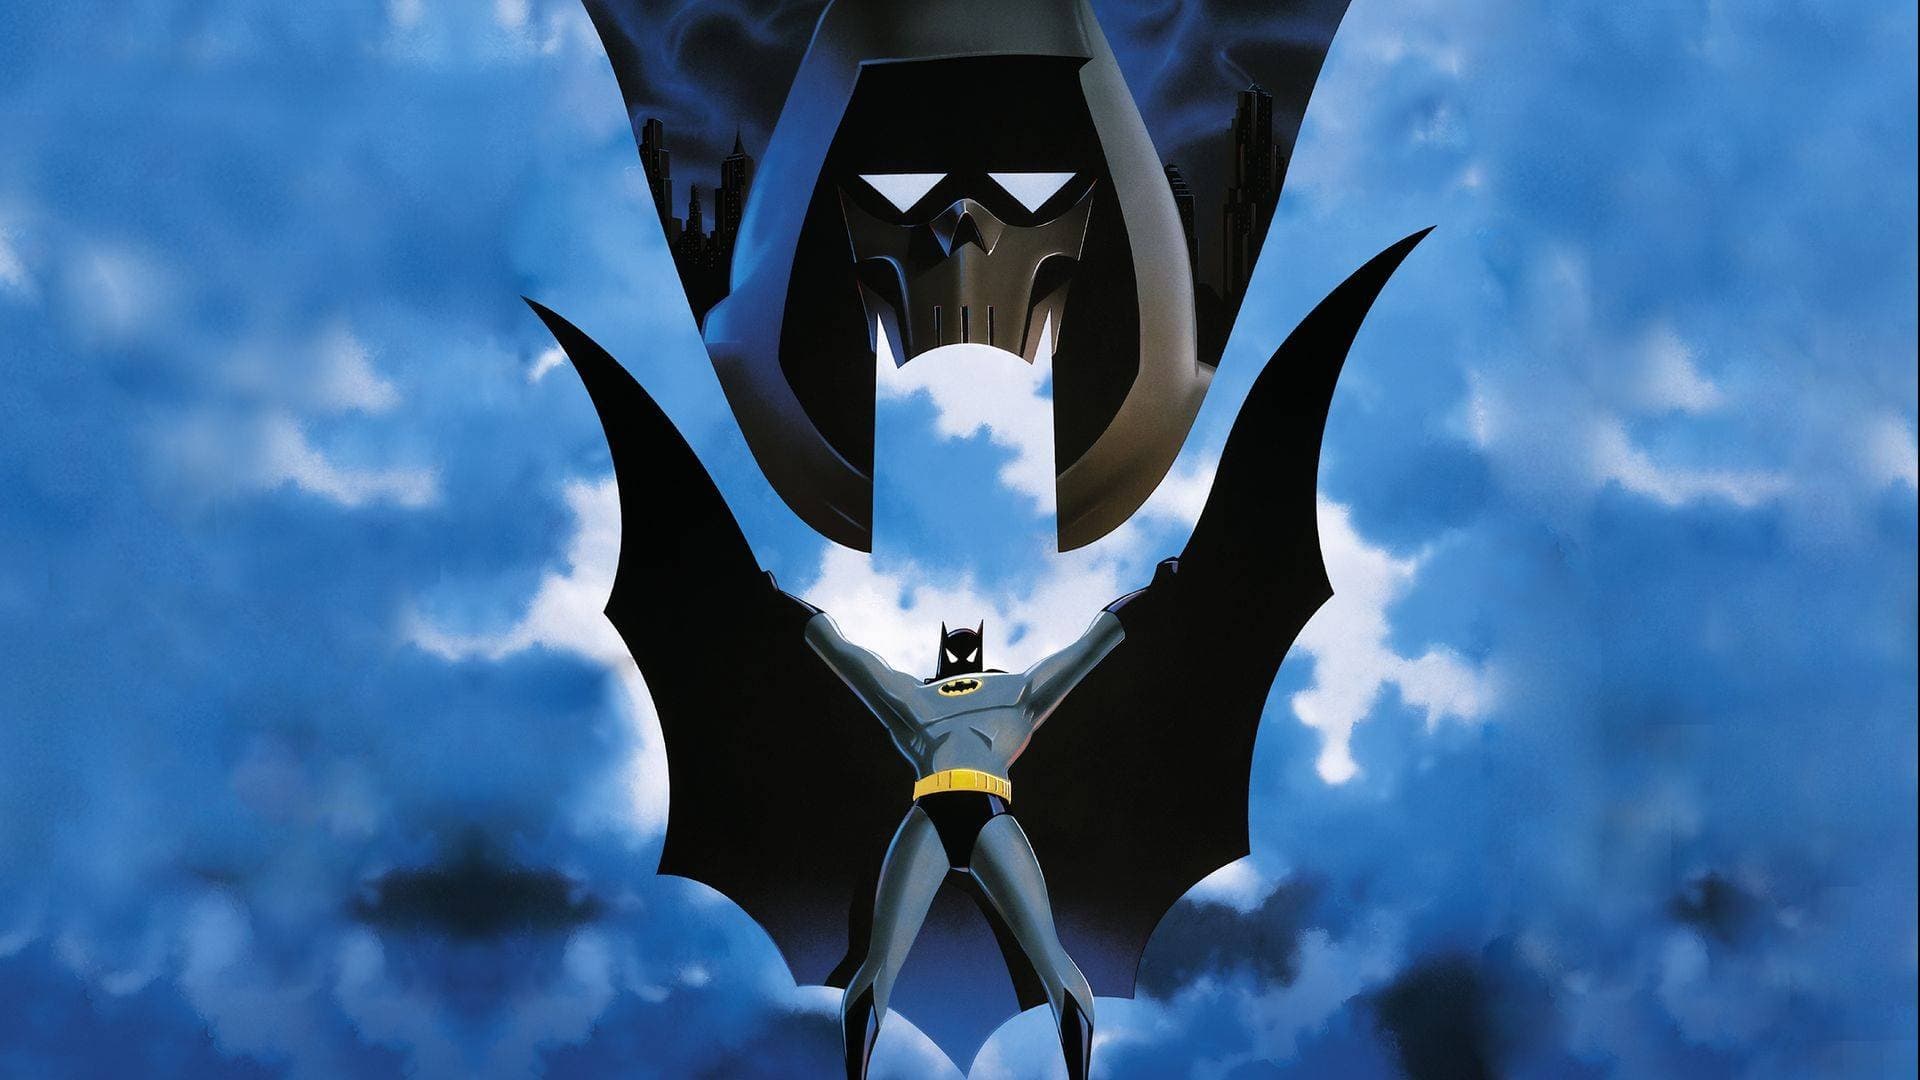 A high-definition desktop wallpaper featuring Batman: Mask of the Phantasm movie theme with a striking background.